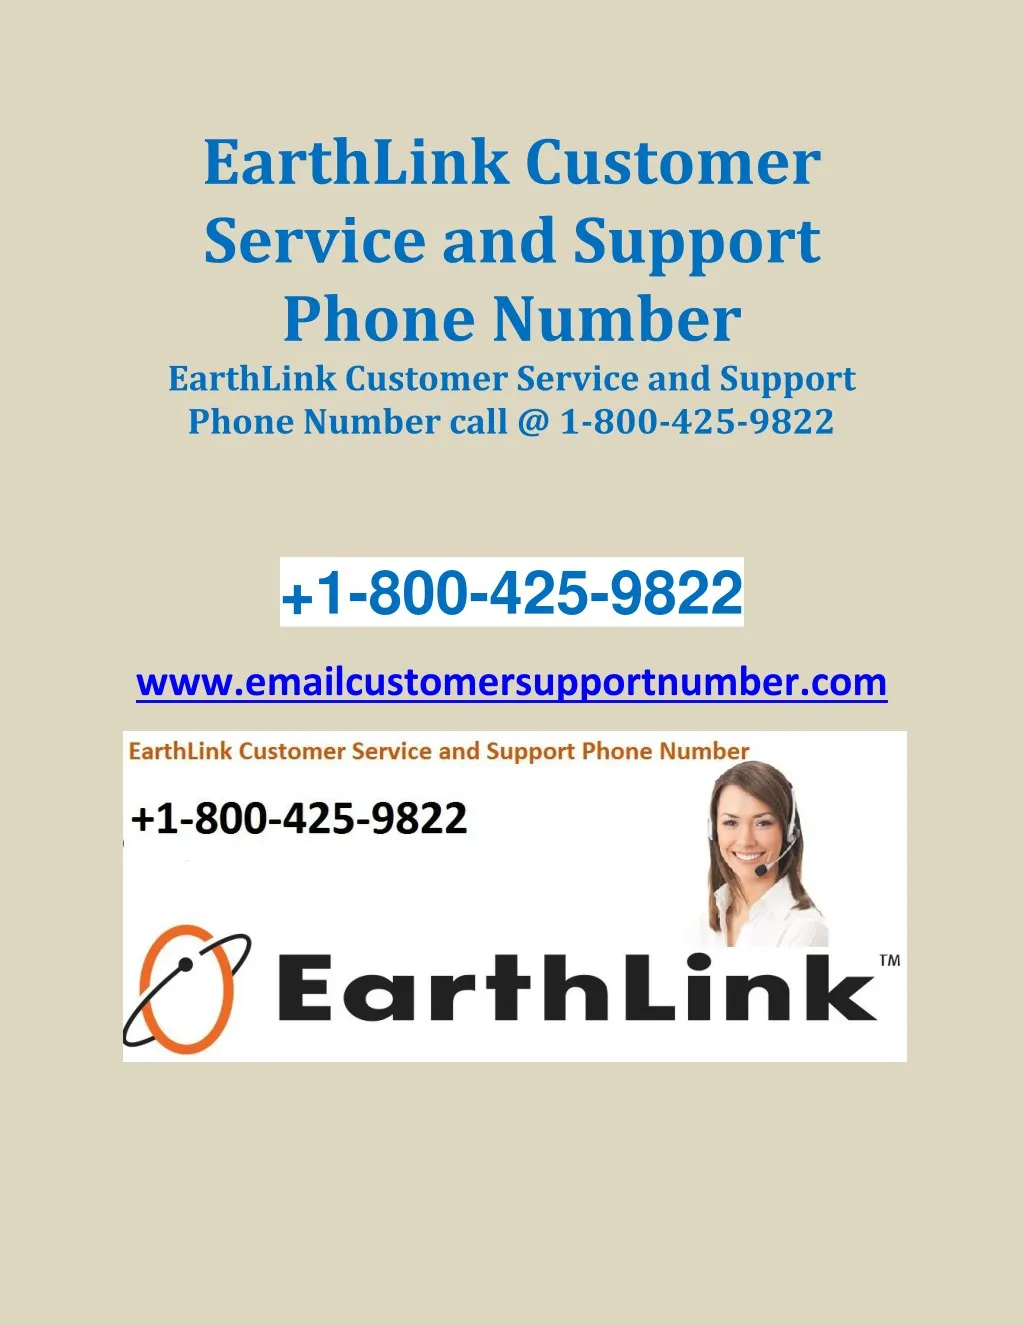 earthlink customer service and support phone